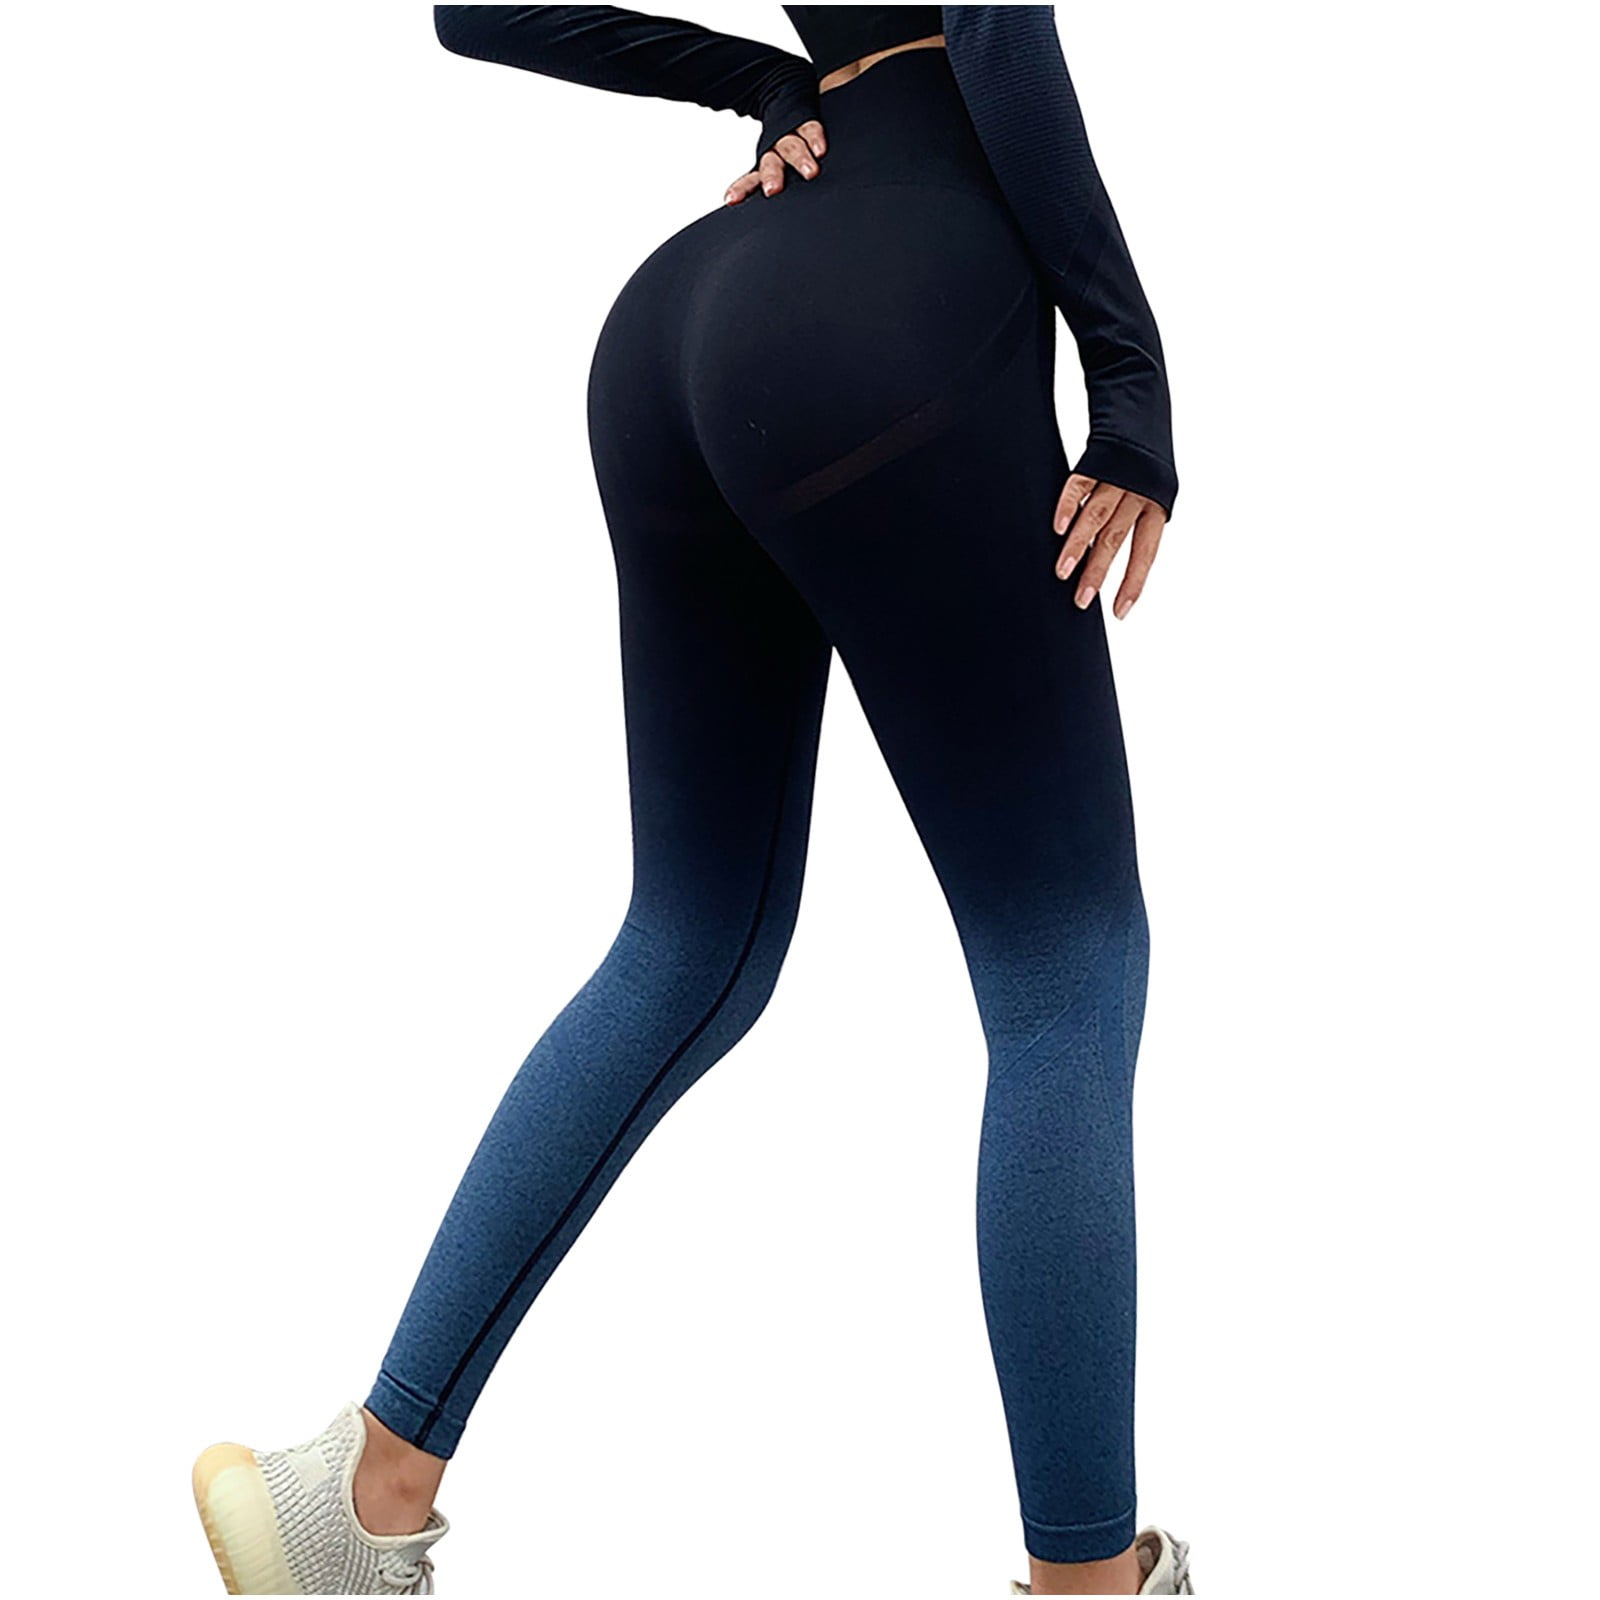 Thermal Leggings For Women - NF Seamless Manufacturing Company